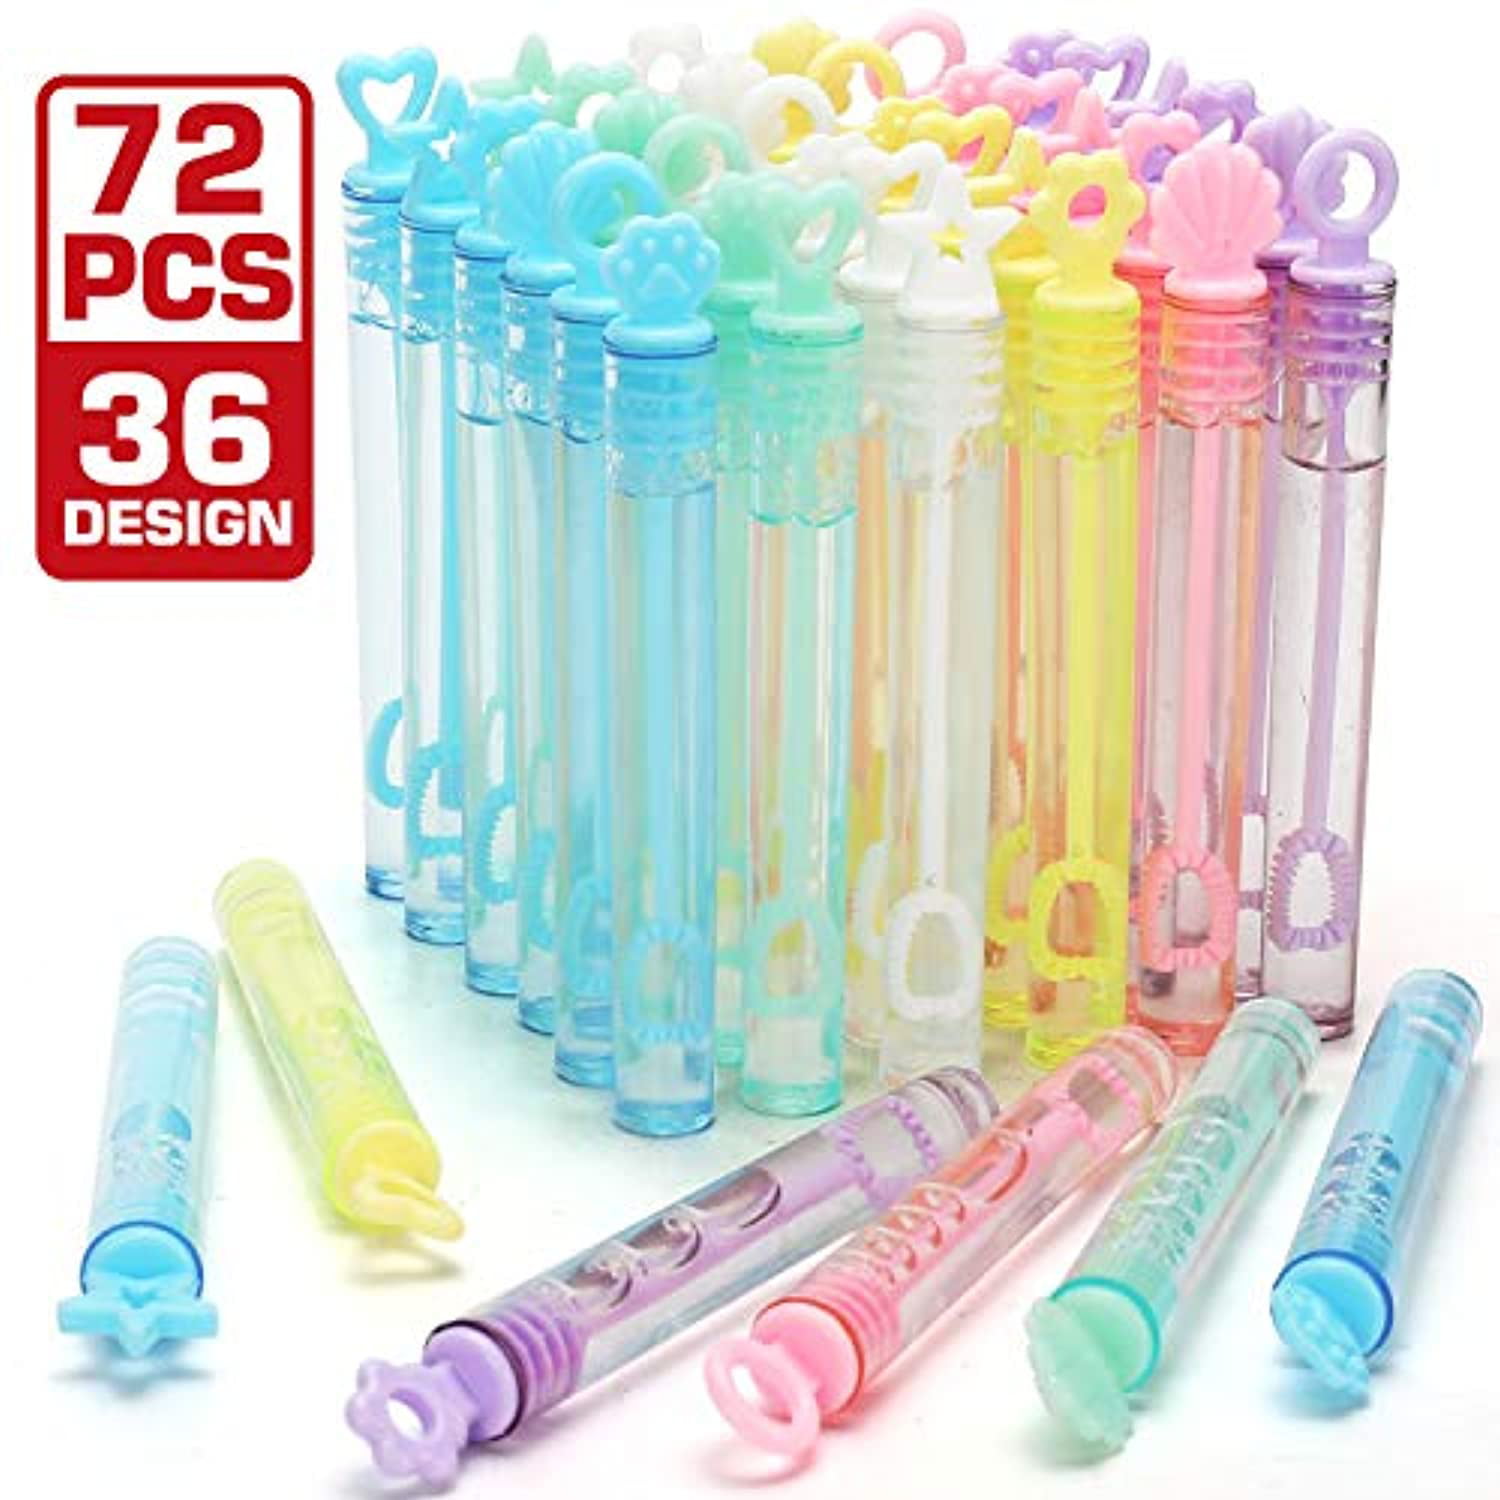 Bubble Maker Toys for Kids,Outdoor Gifts for Girls & Boys Goodie Bags Wedding Carnival Prizes Halloween 66 Pieces Mini Bubble Wands,Bubble Party Favors Assortment Toys for Kids,Themed Birthday